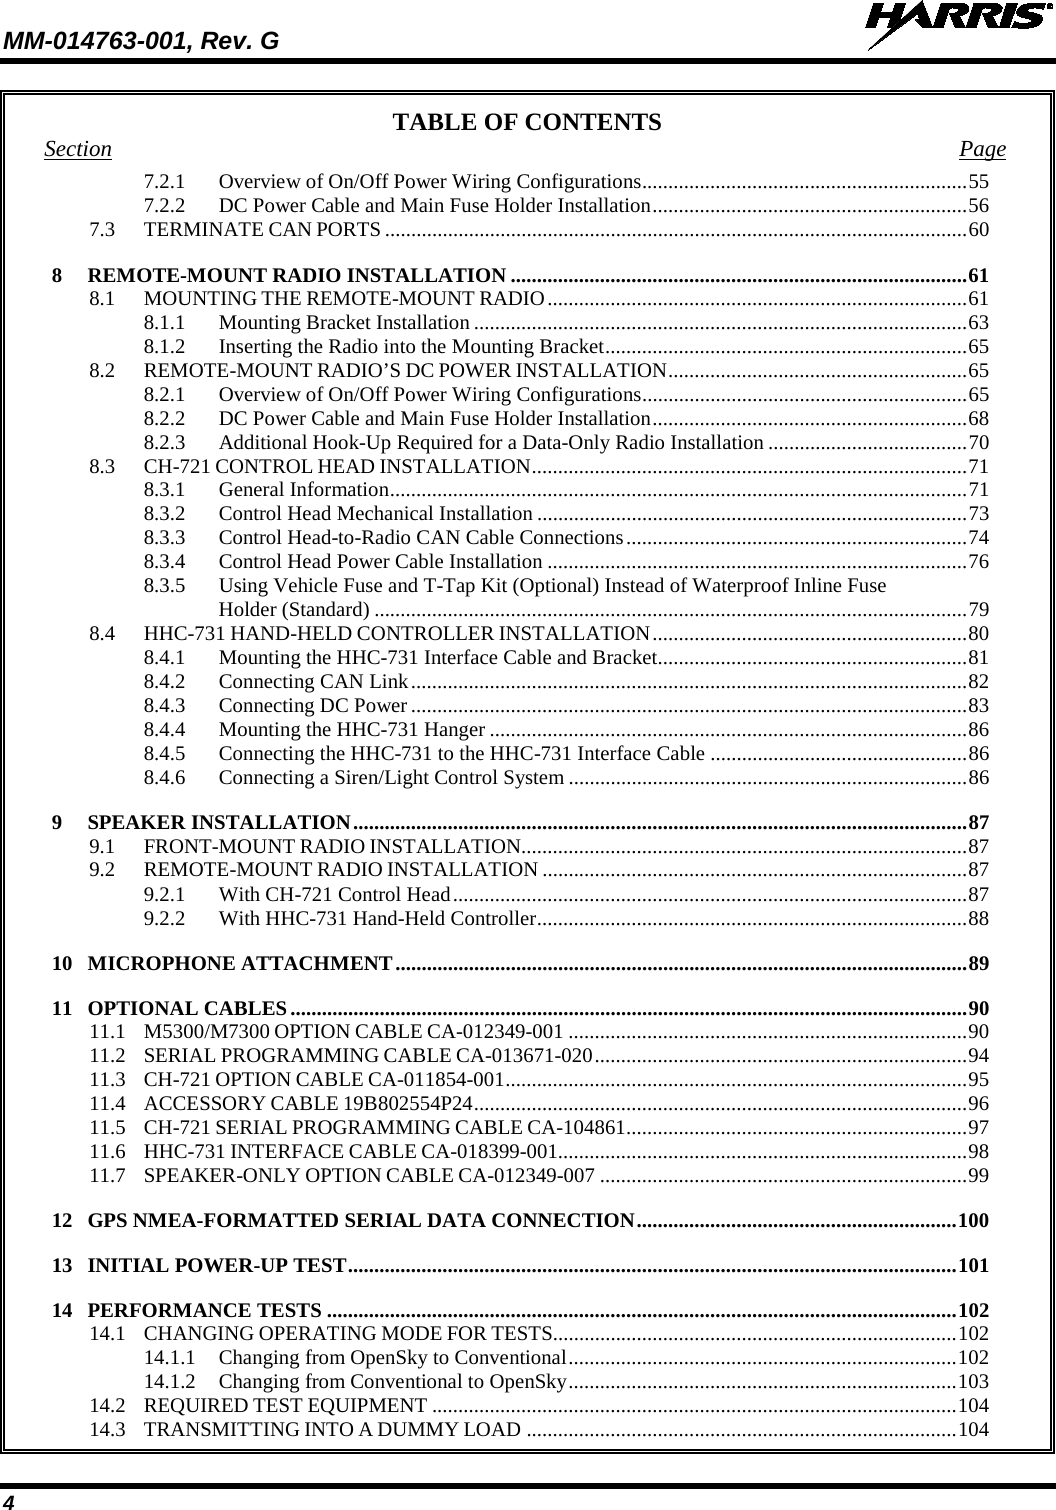 MM-014763-001, Rev. G   4 TABLE OF CONTENTS Section  Page 7.2.1 Overview of On/Off Power Wiring Configurations .............................................................. 55 7.2.2 DC Power Cable and Main Fuse Holder Installation ............................................................ 56 7.3 TERMINATE CAN PORTS ............................................................................................................... 60 8 REMOTE-MOUNT RADIO INSTALLATION ....................................................................................... 61 8.1 MOUNTING THE REMOTE-MOUNT RADIO ................................................................................ 61 8.1.1 Mounting Bracket Installation .............................................................................................. 63 8.1.2 Inserting the Radio into the Mounting Bracket ..................................................................... 65 8.2 REMOTE-MOUNT RADIO’S DC POWER INSTALLATION ......................................................... 65 8.2.1 Overview of On/Off Power Wiring Configurations .............................................................. 65 8.2.2 DC Power Cable and Main Fuse Holder Installation ............................................................ 68 8.2.3 Additional Hook-Up Required for a Data-Only Radio Installation ...................................... 70 8.3 CH-721 CONTROL HEAD INSTALLATION ................................................................................... 71 8.3.1 General Information .............................................................................................................. 71 8.3.2 Control Head Mechanical Installation .................................................................................. 73 8.3.3 Control Head-to-Radio CAN Cable Connections ................................................................. 74 8.3.4 Control Head Power Cable Installation ................................................................................ 76 8.3.5 Using Vehicle Fuse and T-Tap Kit (Optional) Instead of Waterproof Inline Fuse Holder (Standard) ................................................................................................................. 79 8.4 HHC-731 HAND-HELD CONTROLLER INSTALLATION ............................................................ 80 8.4.1 Mounting the HHC-731 Interface Cable and Bracket ........................................................... 81 8.4.2 Connecting CAN Link .......................................................................................................... 82 8.4.3 Connecting DC Power .......................................................................................................... 83 8.4.4 Mounting the HHC-731 Hanger ........................................................................................... 86 8.4.5 Connecting the HHC-731 to the HHC-731 Interface Cable ................................................. 86 8.4.6 Connecting a Siren/Light Control System ............................................................................ 86 9 SPEAKER INSTALLATION ..................................................................................................................... 87 9.1 FRONT-MOUNT RADIO INSTALLATION..................................................................................... 87 9.2 REMOTE-MOUNT RADIO INSTALLATION ................................................................................. 87 9.2.1 With CH-721 Control Head .................................................................................................. 87 9.2.2 With HHC-731 Hand-Held Controller .................................................................................. 88 10 MICROPHONE ATTACHMENT ............................................................................................................. 89 11 OPTIONAL CABLES ................................................................................................................................. 90 11.1 M5300/M7300 OPTION CABLE CA-012349-001 ............................................................................ 90 11.2 SERIAL PROGRAMMING CABLE CA-013671-020 ....................................................................... 94 11.3 CH-721 OPTION CABLE CA-011854-001 ........................................................................................ 95 11.4 ACCESSORY CABLE 19B802554P24 .............................................................................................. 96 11.5 CH-721 SERIAL PROGRAMMING CABLE CA-104861 ................................................................. 97 11.6 HHC-731 INTERFACE CABLE CA-018399-001.............................................................................. 98 11.7 SPEAKER-ONLY OPTION CABLE CA-012349-007 ...................................................................... 99 12 GPS NMEA-FORMATTED SERIAL DATA CONNECTION ............................................................. 100 13 INITIAL POWER-UP TEST .................................................................................................................... 101 14 PERFORMANCE TESTS ........................................................................................................................ 102 14.1 CHANGING OPERATING MODE FOR TESTS............................................................................. 102 14.1.1 Changing from OpenSky to Conventional .......................................................................... 102 14.1.2 Changing from Conventional to OpenSky .......................................................................... 103 14.2 REQUIRED TEST EQUIPMENT .................................................................................................... 104 14.3 TRANSMITTING INTO A DUMMY LOAD .................................................................................. 104 